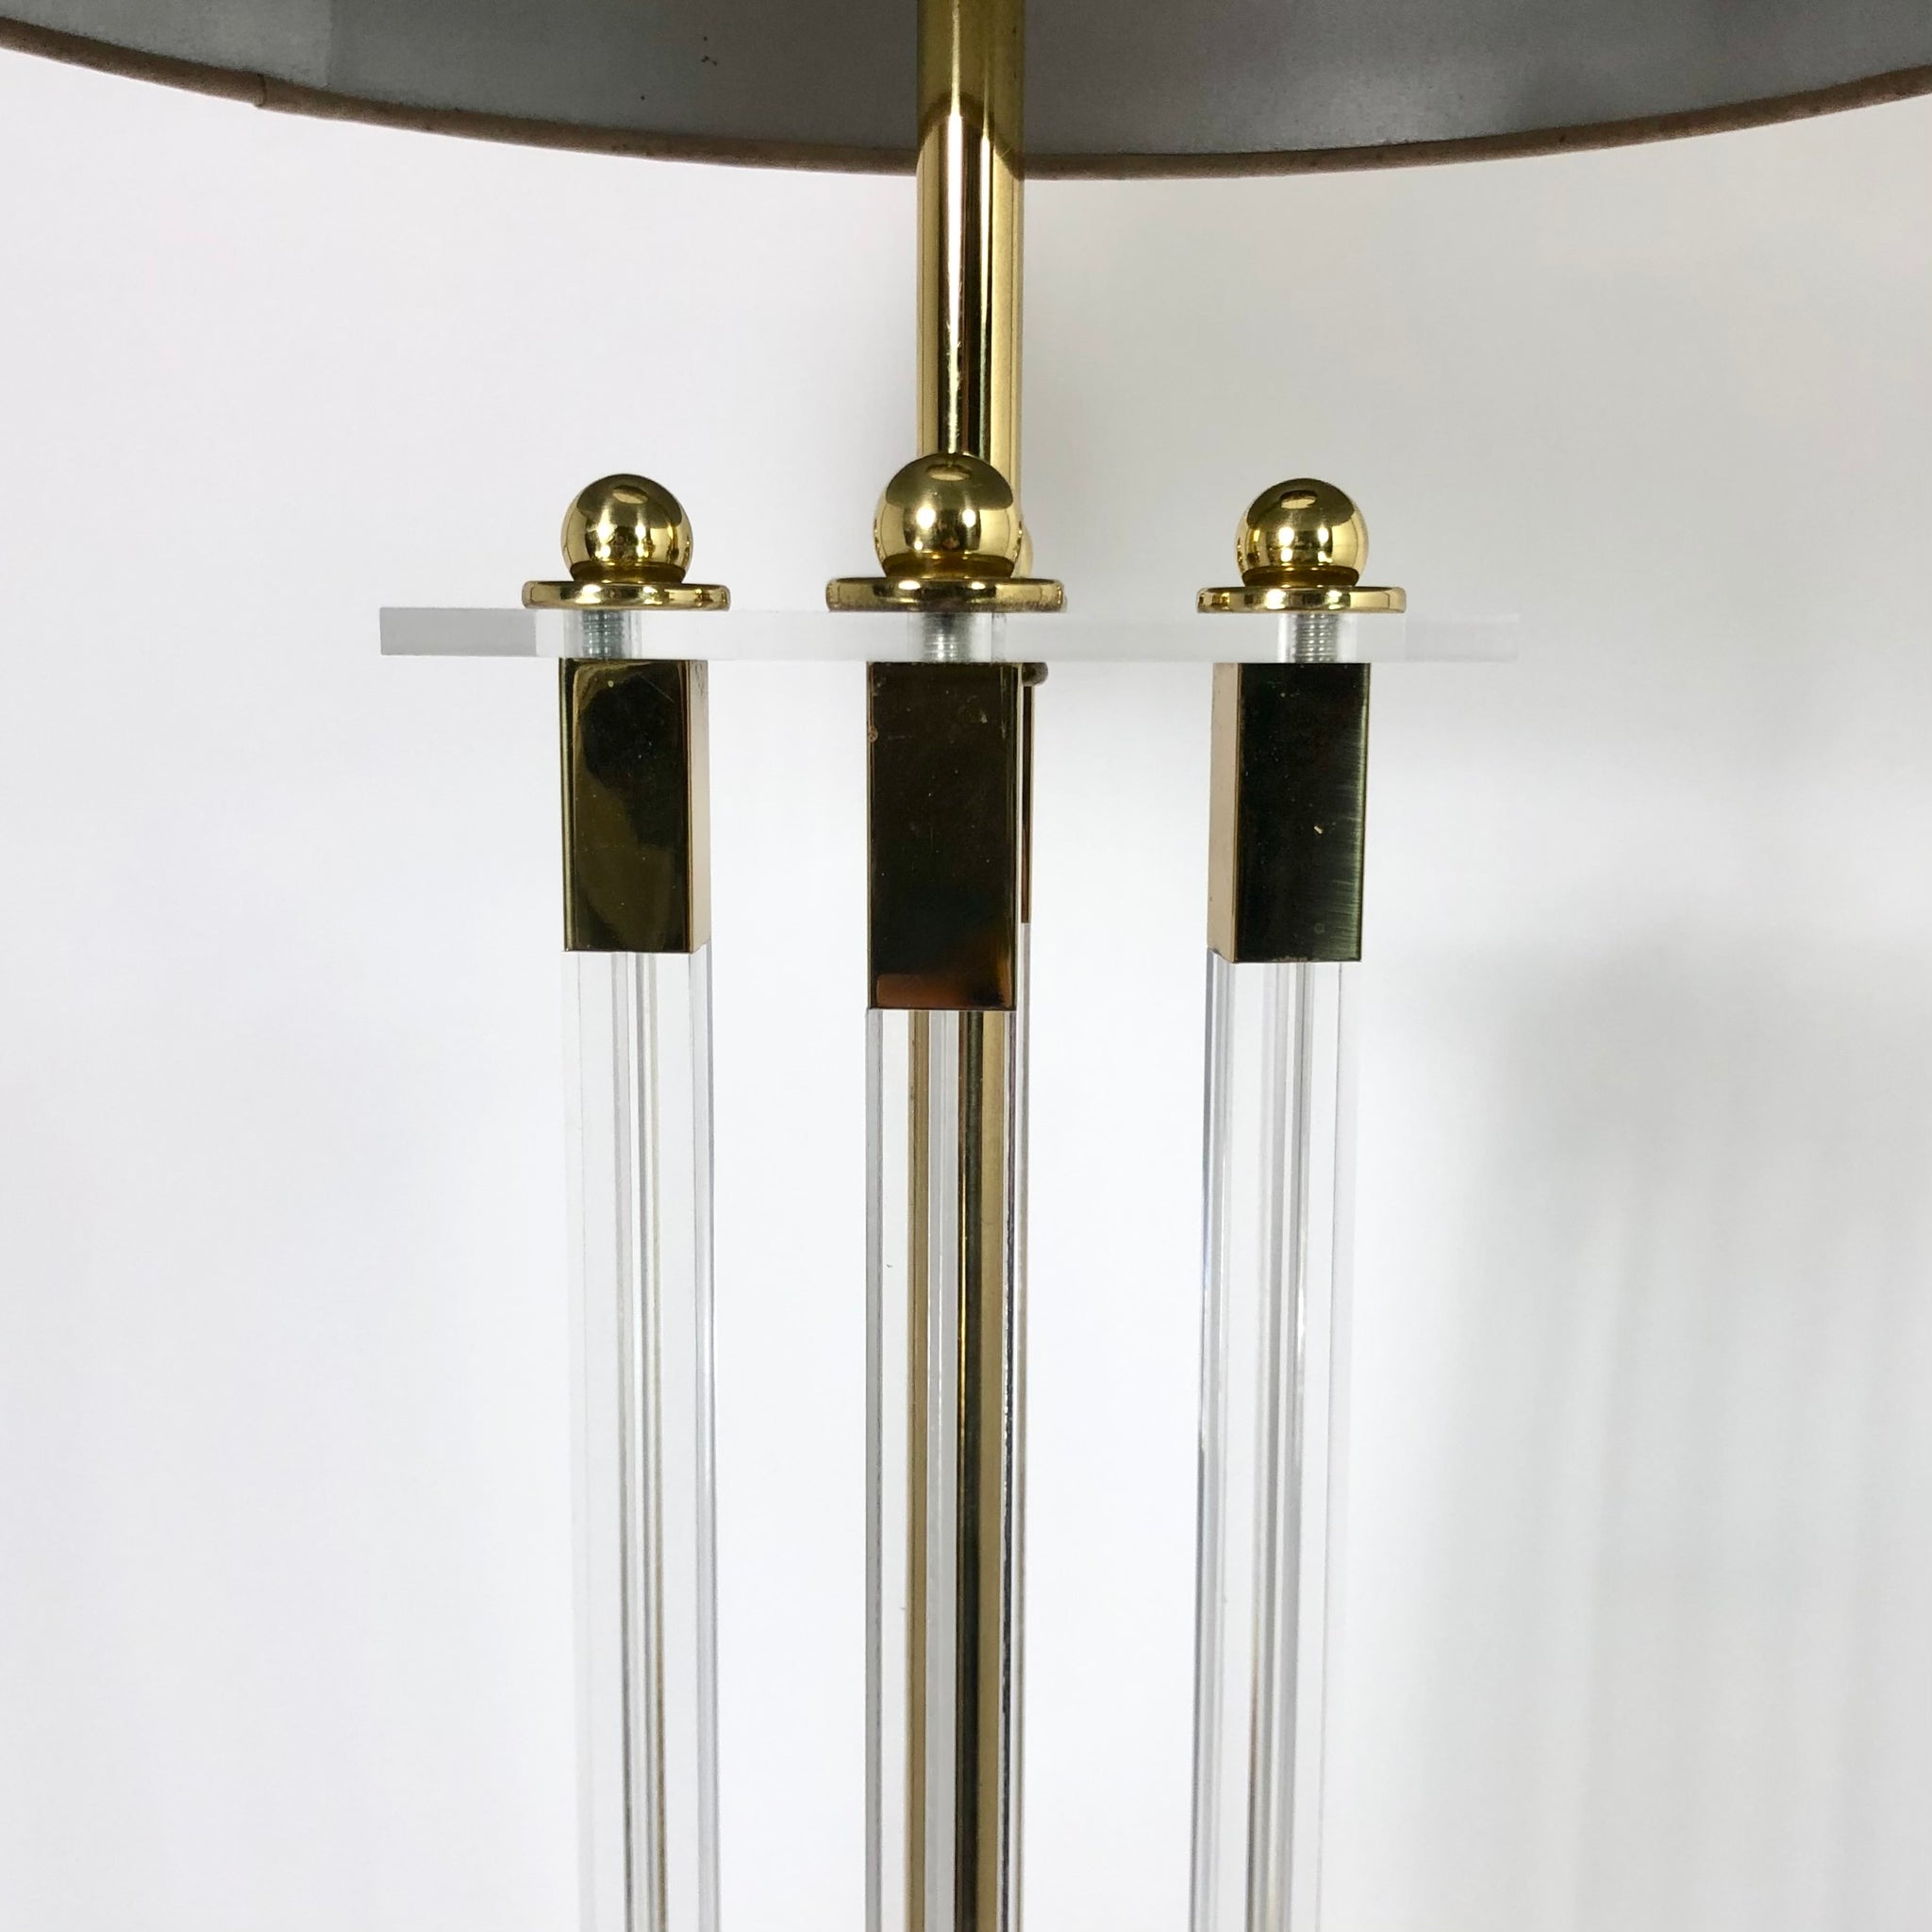 Hollywood Rengecy lucite and gilt metal  1970's floor lamp.